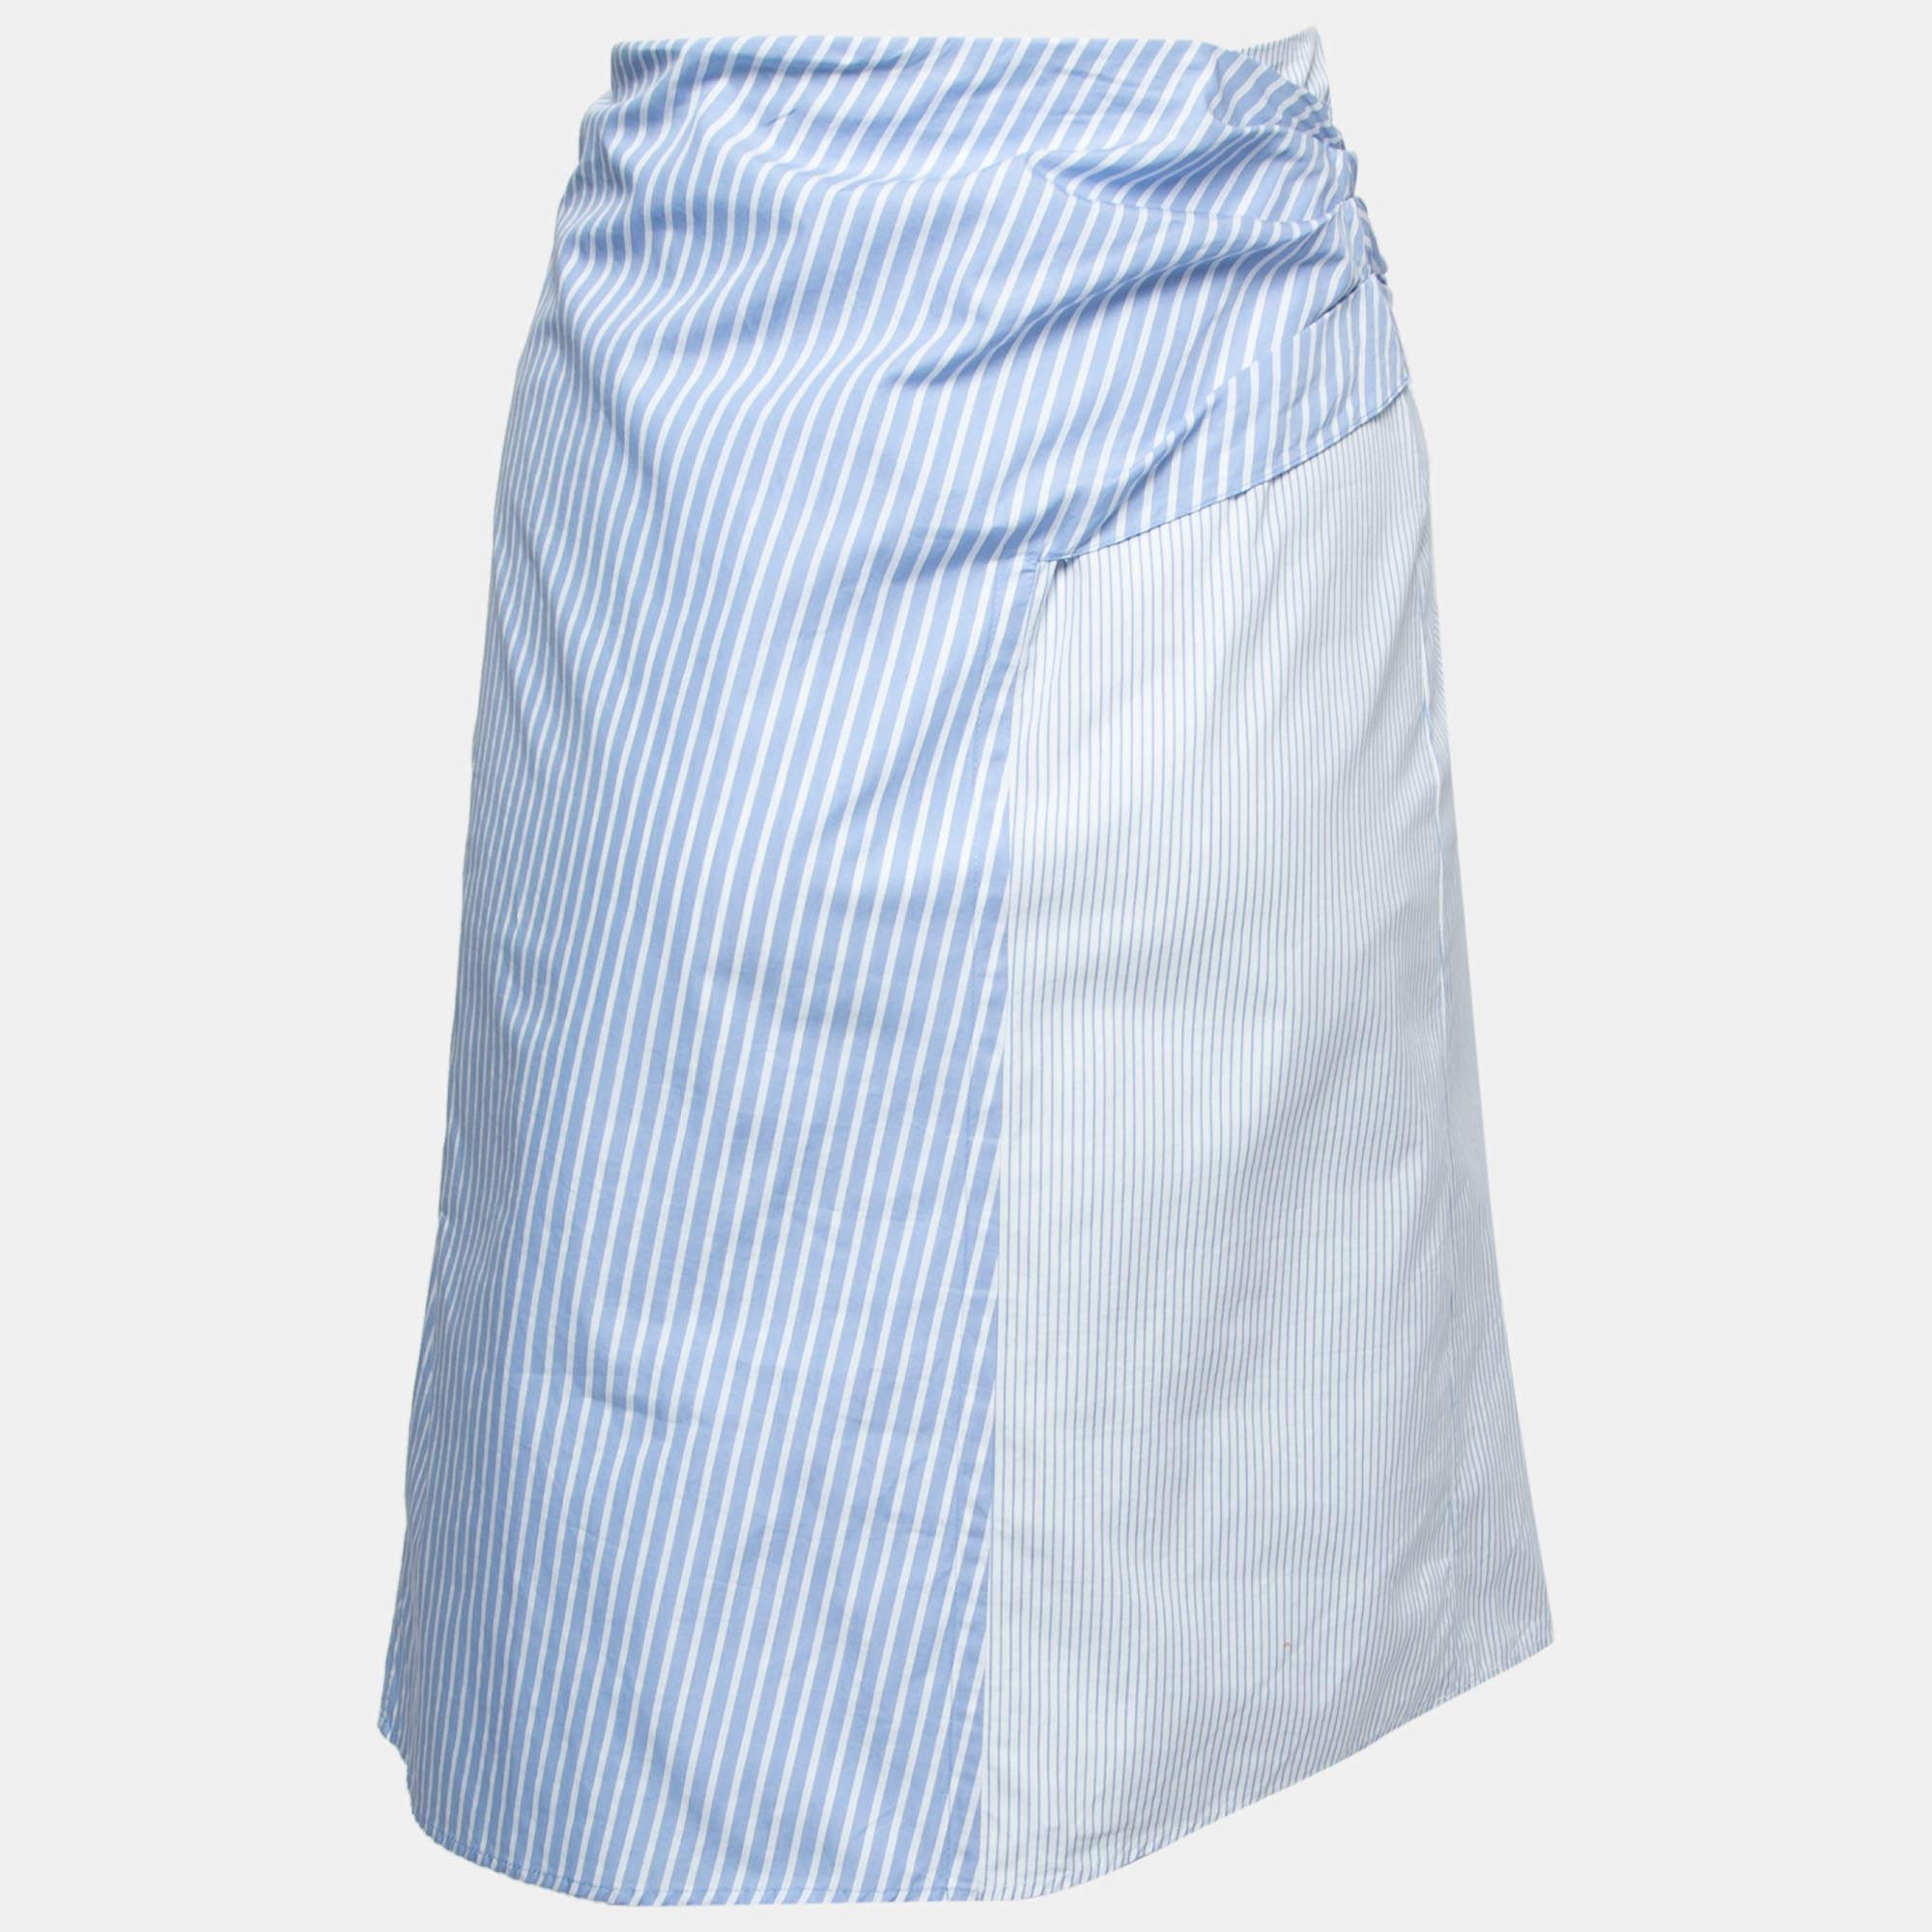 Tailored in a lightweight and comfortable cotton fabric, this Dior skirt features stripes all over. The blue and white piece comes with an asymmetric hem. Team with a shirt or crop top to complete a sophisticated look.

